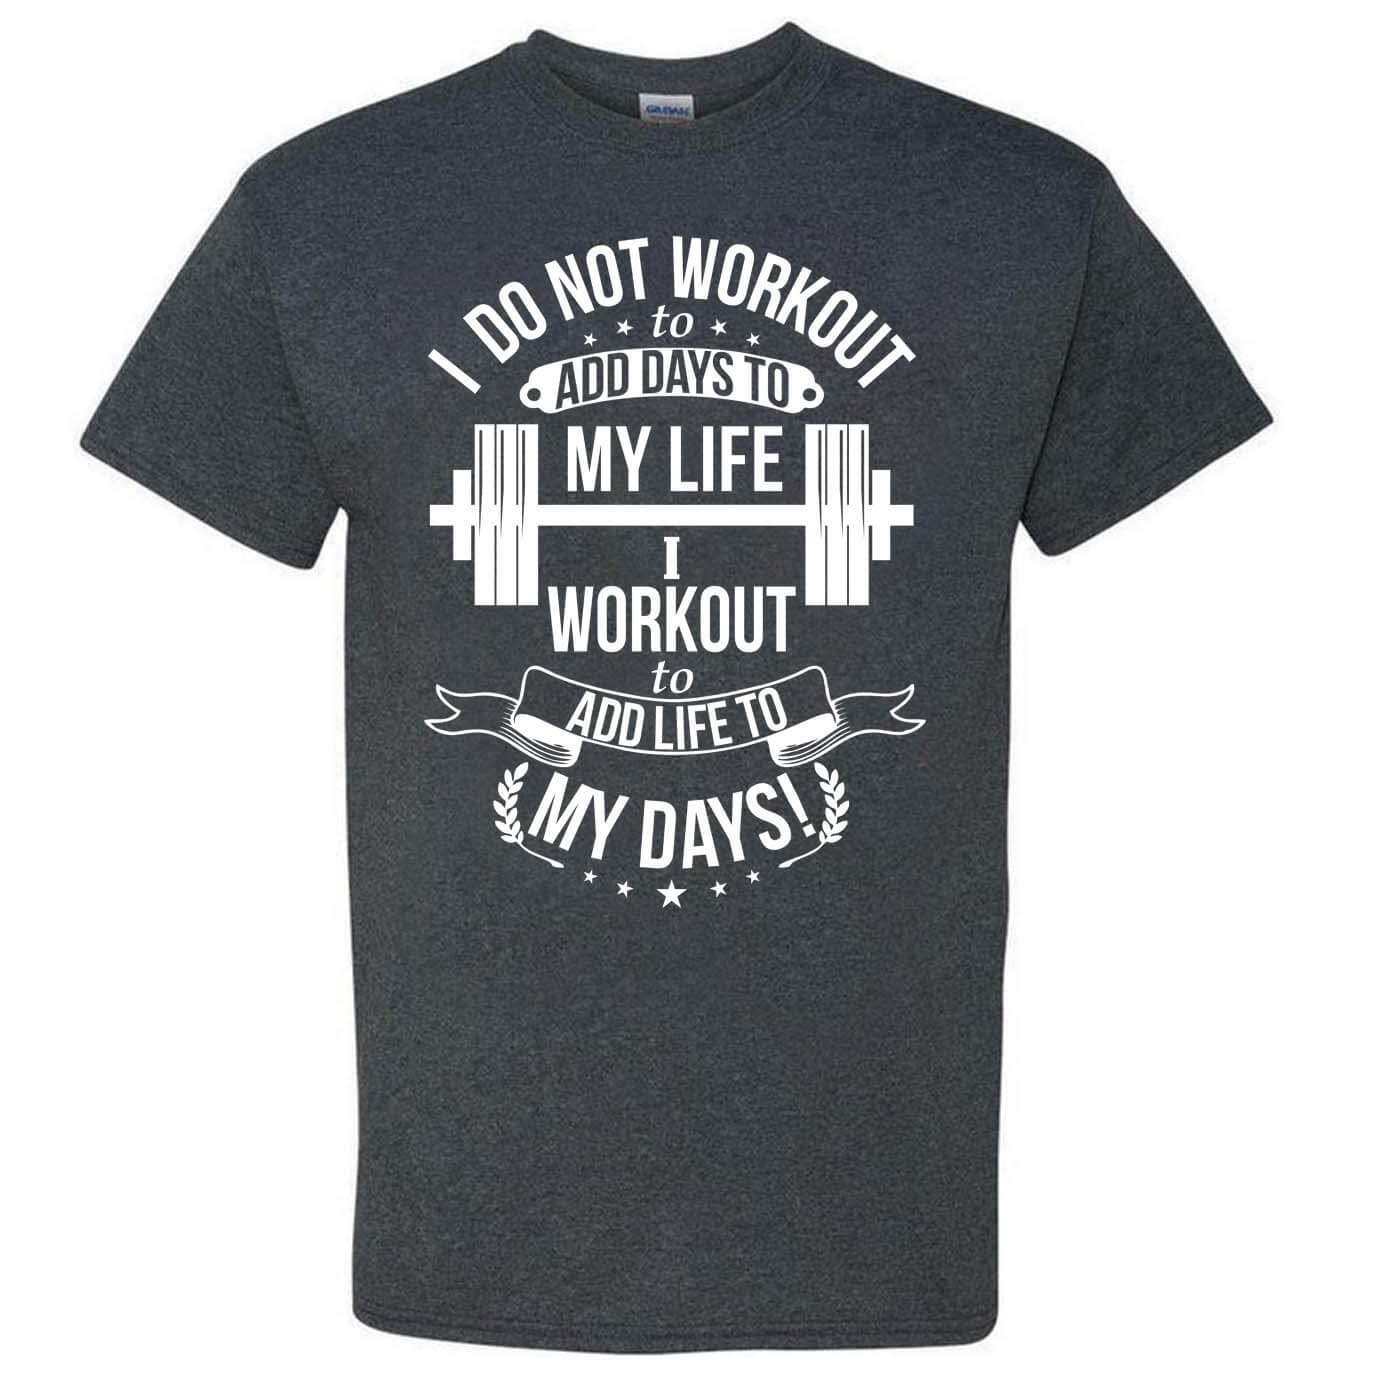 I Workout To Add Life To My Days